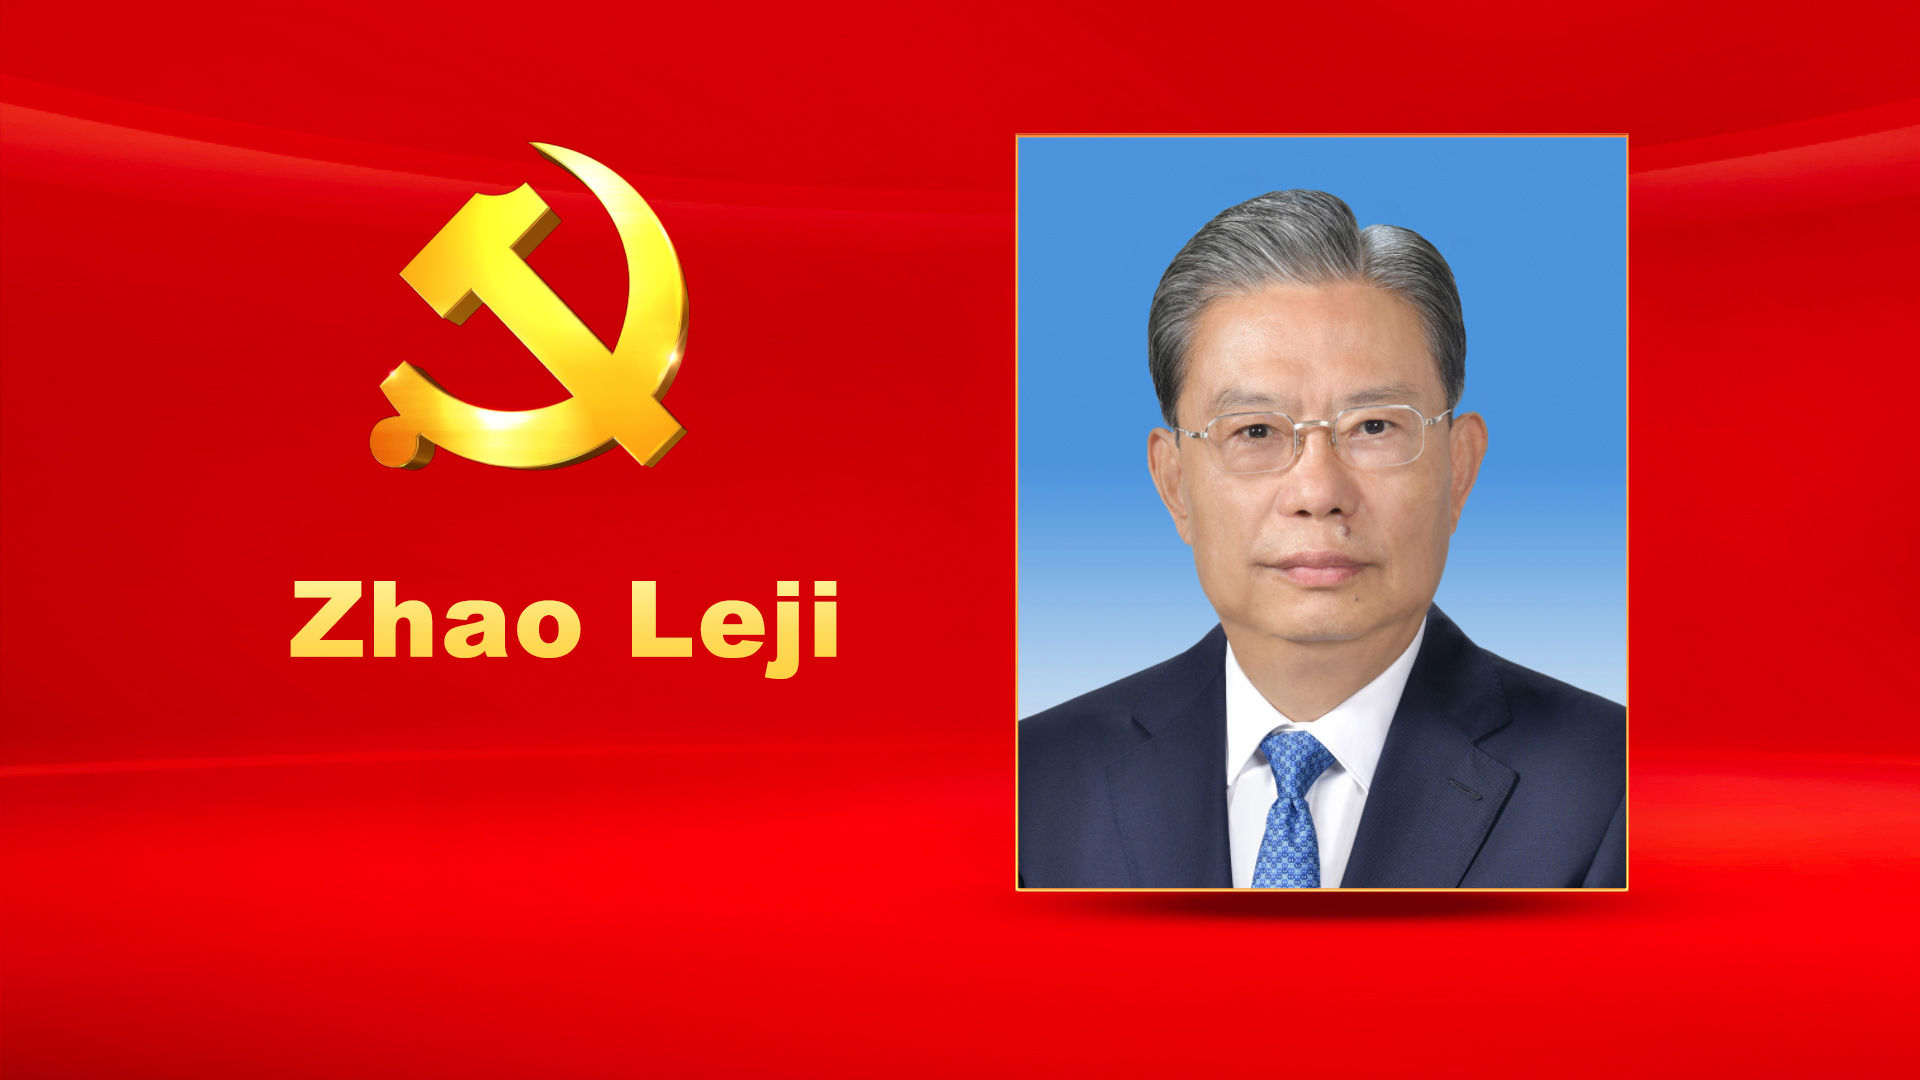 Zhao Leji, male, Han ethnicity, was born in March 1957 and is from Xi'an, Shaanxi Province. He began his first job in September 1974 and joined the Communist Party of China (CPC) in July 1975. He received a graduate education at the Central Party School. Zhao is currently a member of the Standing Committee of the CPC Central Committee Political Bureau.